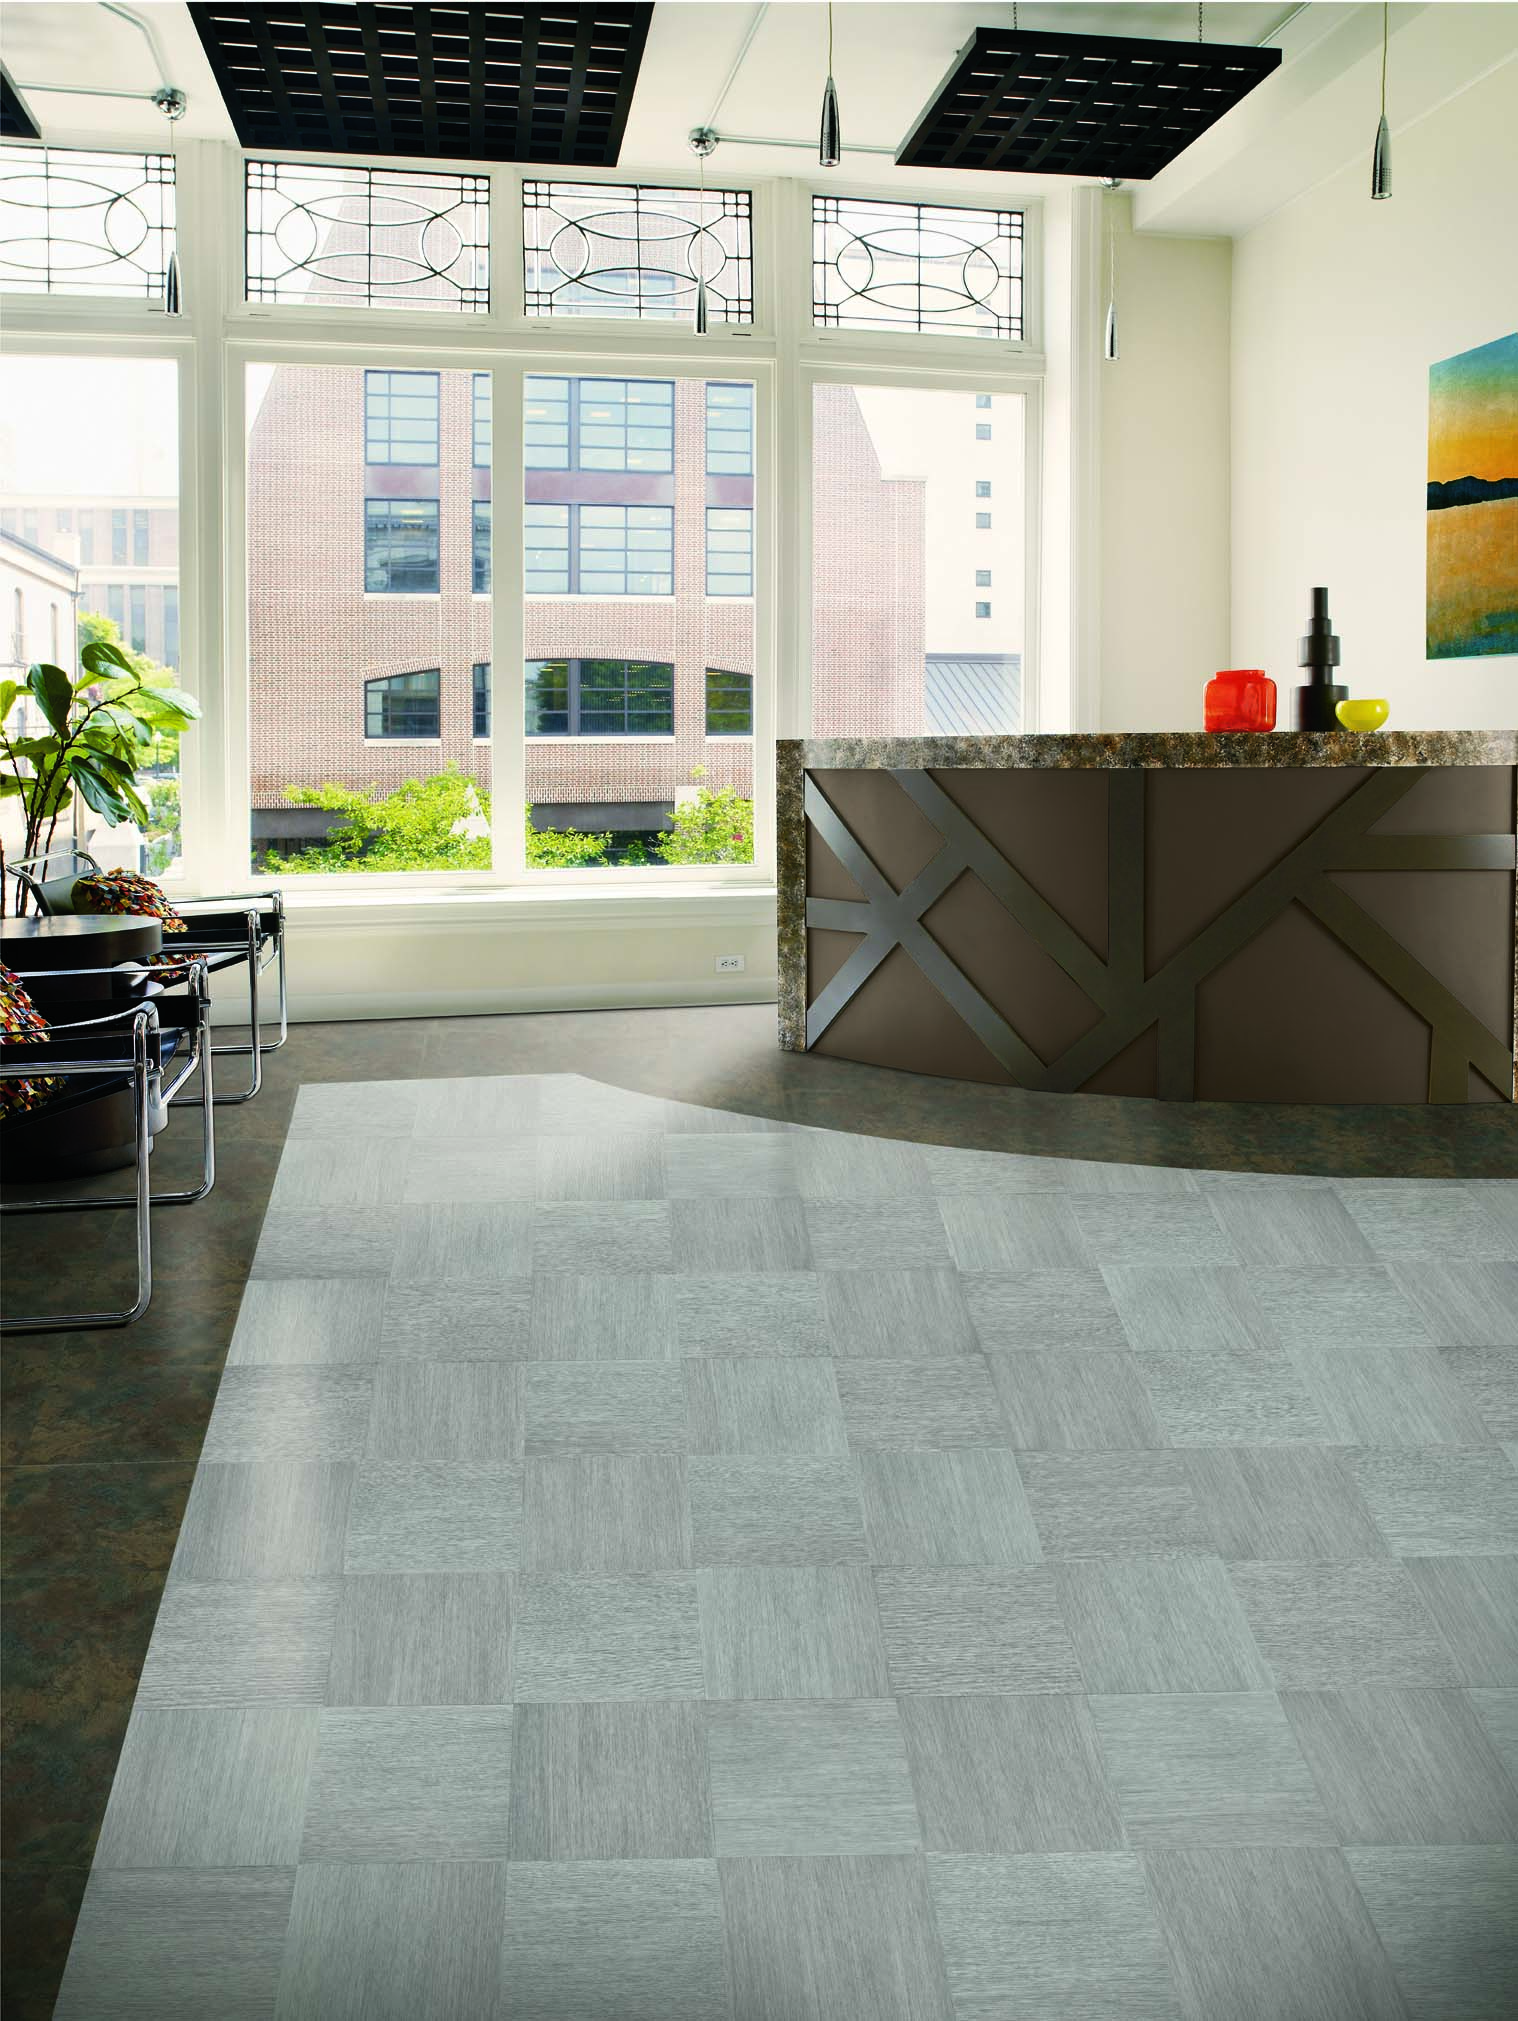 Armstrong Announces a New Innovative LVT Solution Returning Spaces to Operational Status Sooner